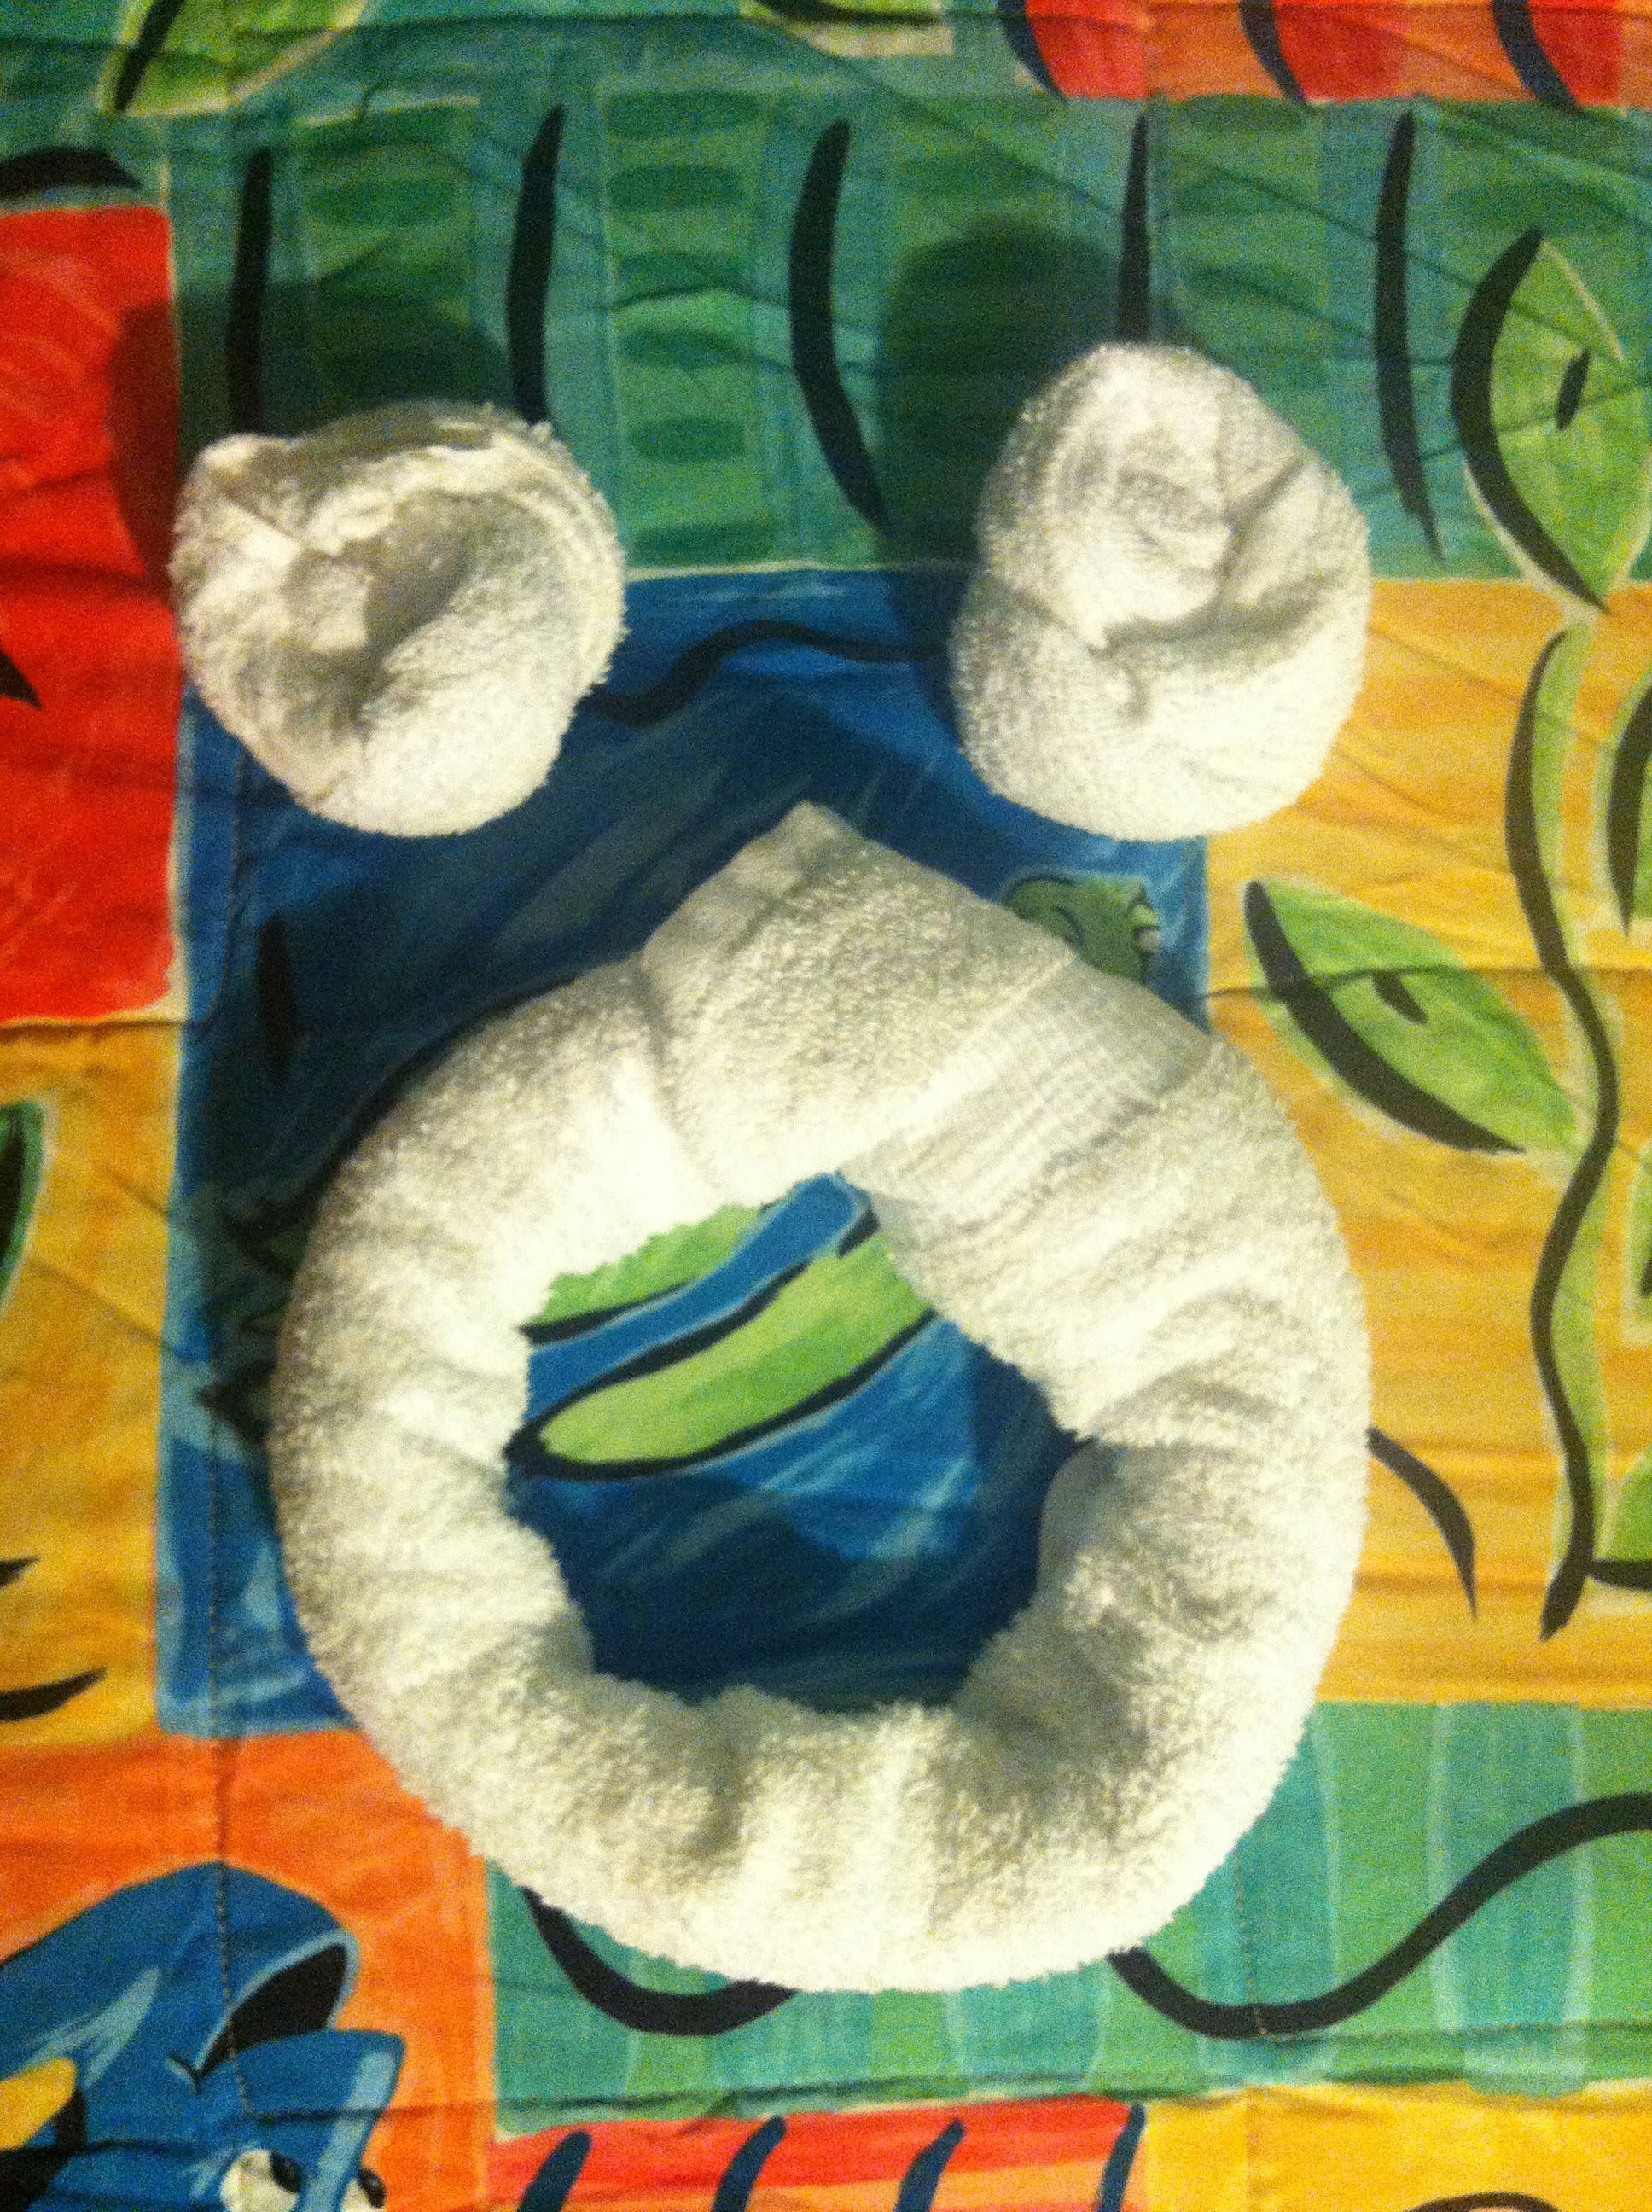 Mickey shaped towels waiting in the room.